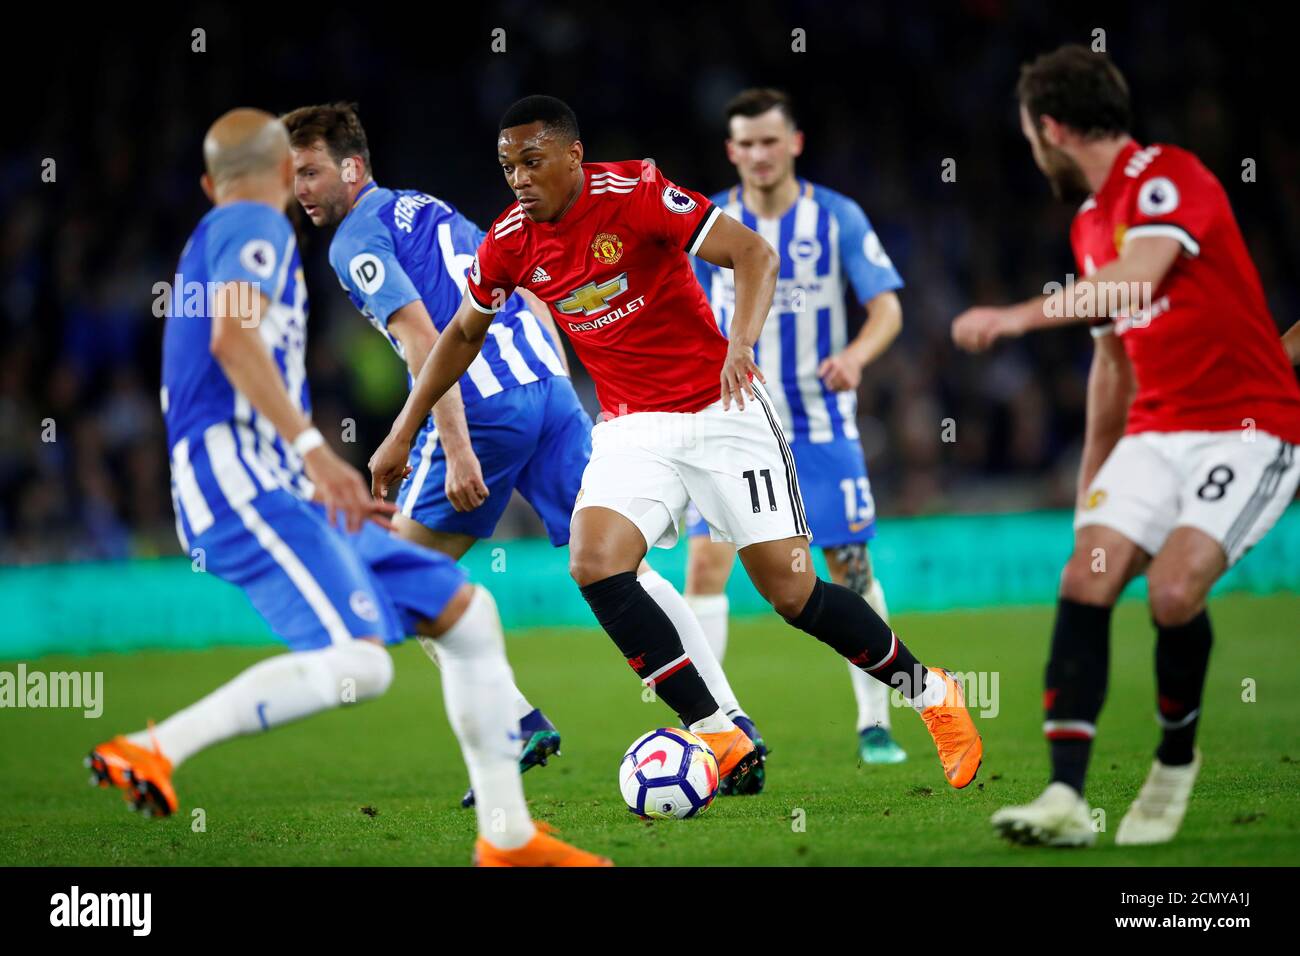 Soccer Football - Premier League - Brighton & Hove Albion v Manchester United - The American Express Community Stadium, Brighton, Britain - May 4, 2018   Manchester United's Anthony Martial in action with Brighton's Dale Stephens    REUTERS/Eddie Keogh    EDITORIAL USE ONLY. No use with unauthorized audio, video, data, fixture lists, club/league logos or "live" services. Online in-match use limited to 75 images, no video emulation. No use in betting, games or single club/league/player publications.  Please contact your account representative for further details. Stock Photo